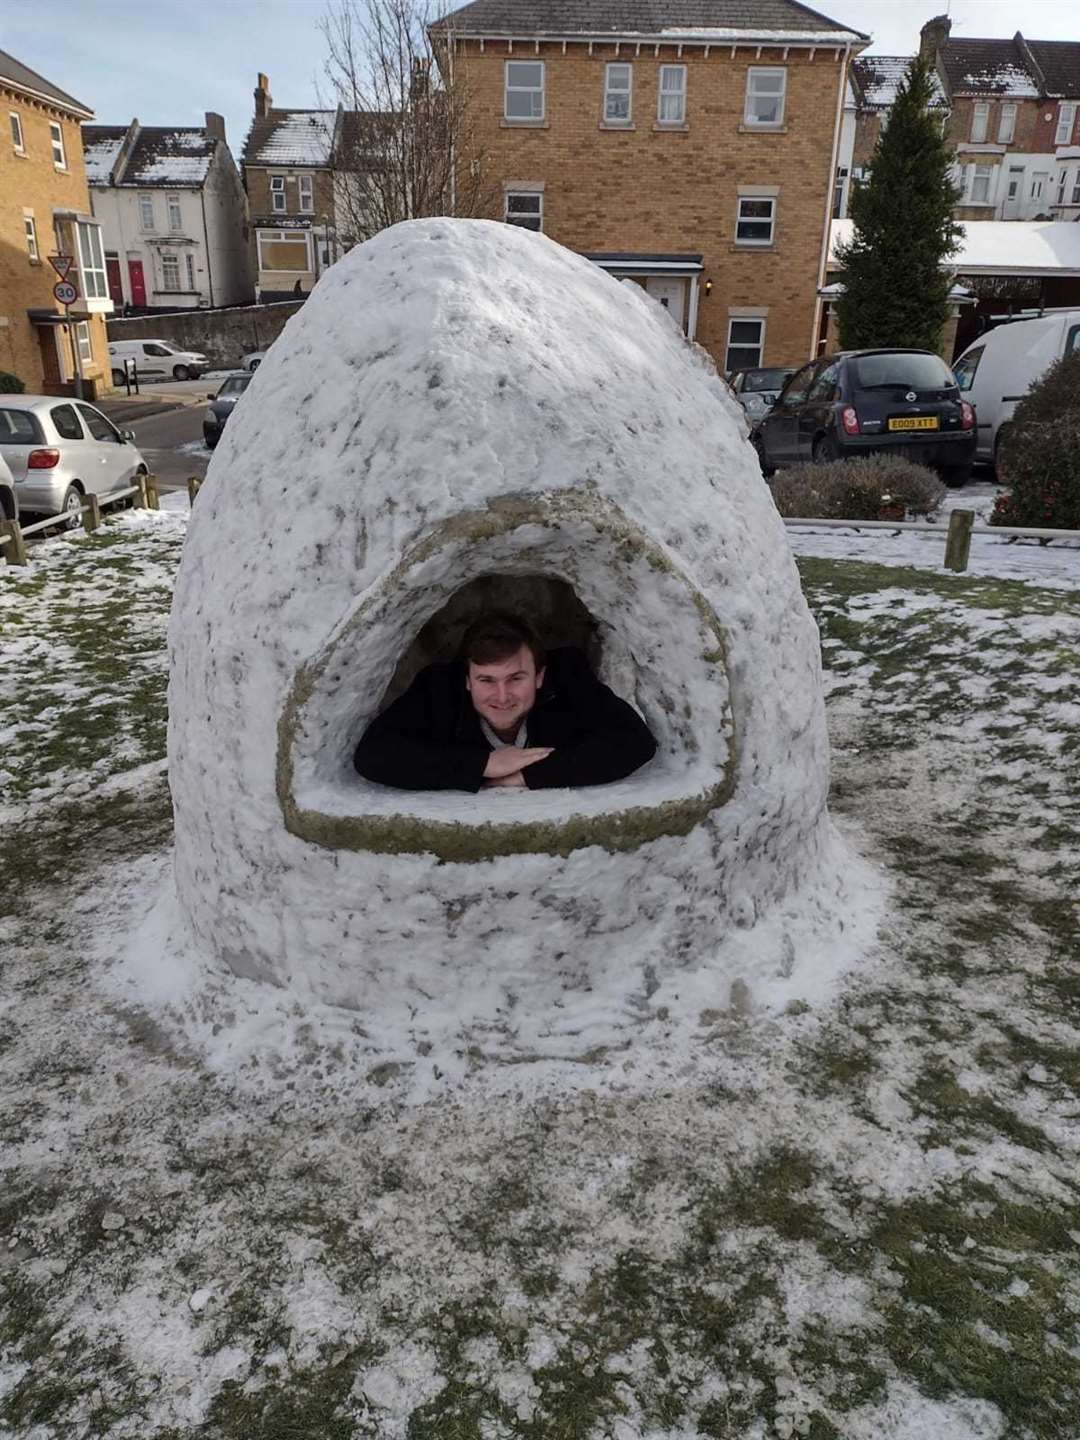 Miroslav Pekalev built this igloo for the local community to enjoy